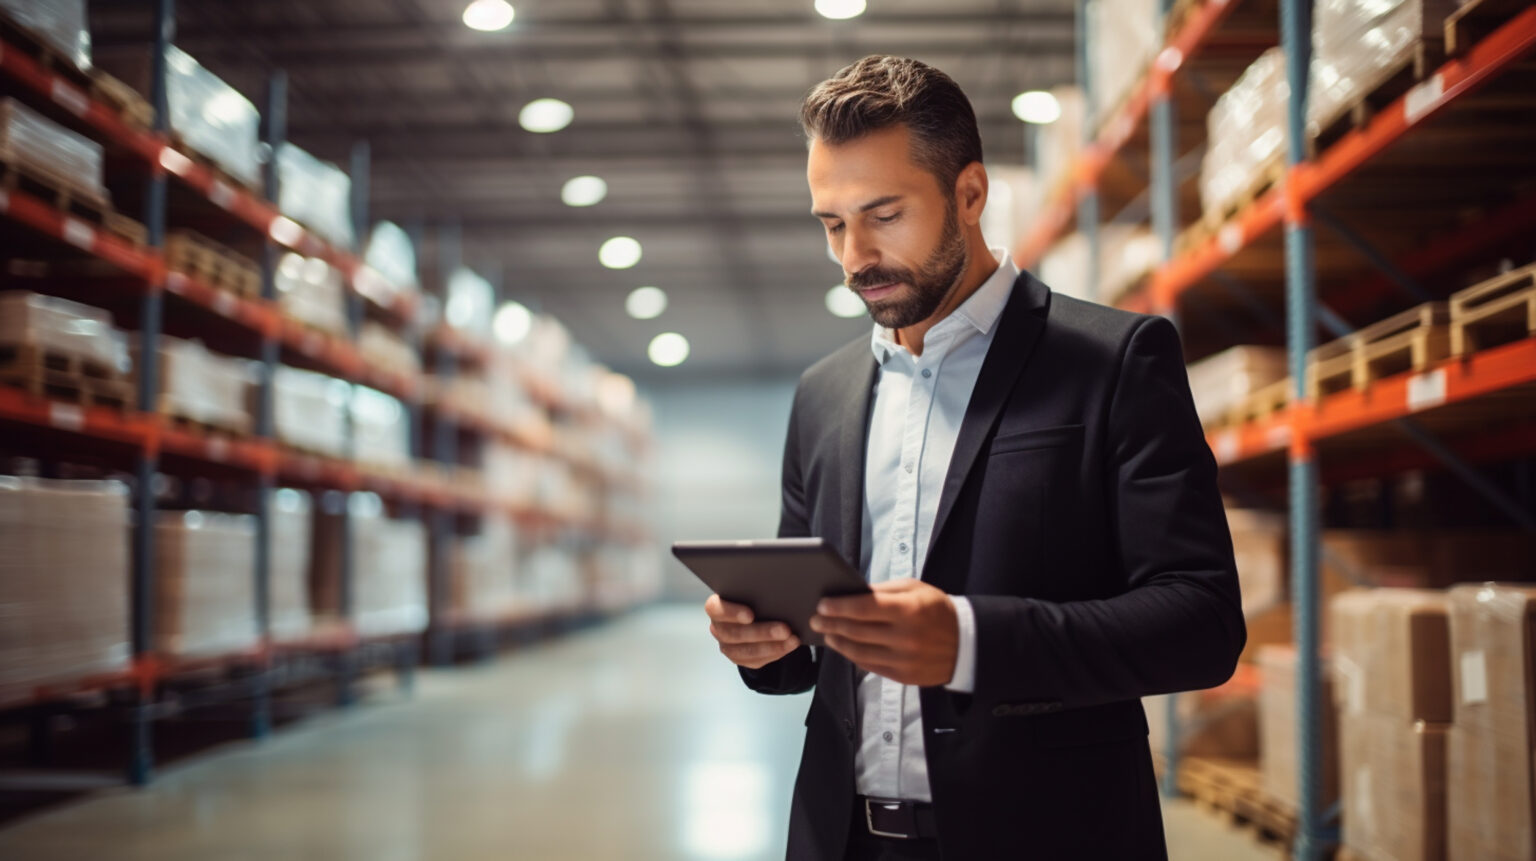 Integrate A Next-Gen Inventory Management System with Veras OmniView